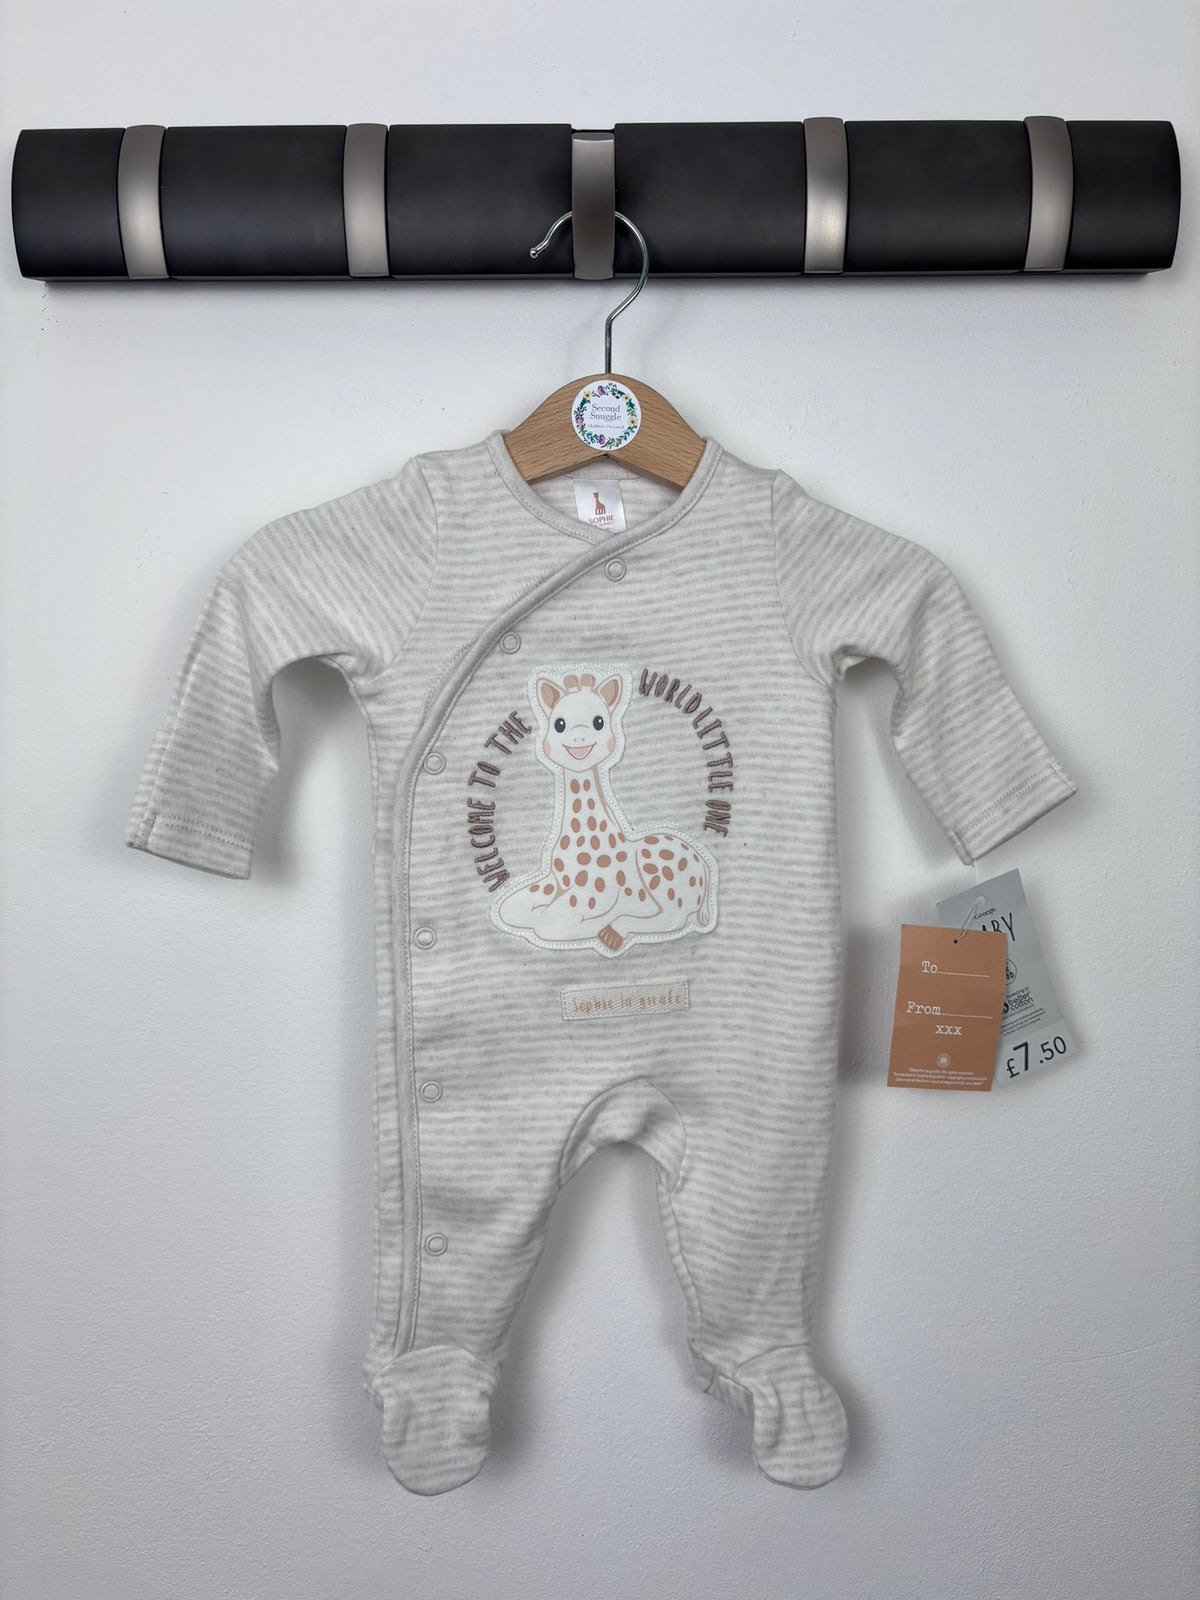 George Tiny Baby-Sleepsuits-Second Snuggle Preloved